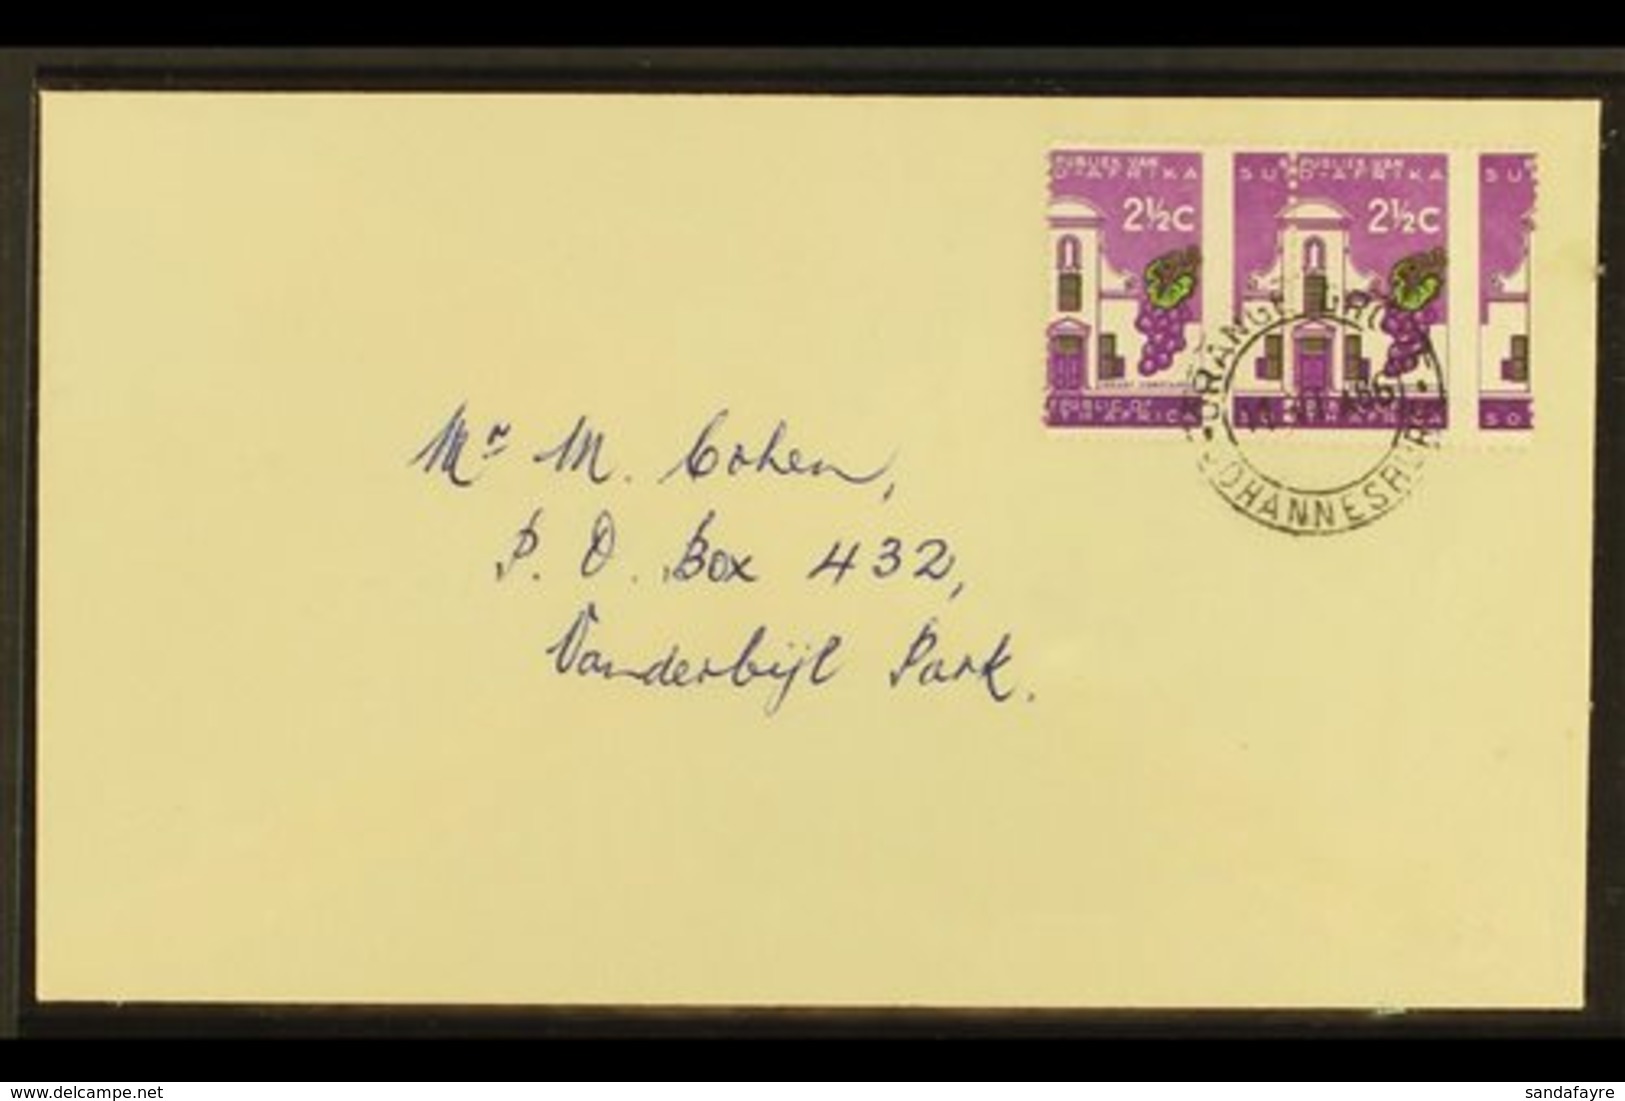 RSA VARIETY  1963-7 2½c Bright Reddish Violet & Emerald, Wmk RSA, GROSSLY MISPERFORATED PAIR On Cover, SG 230a, Neat ORA - Unclassified